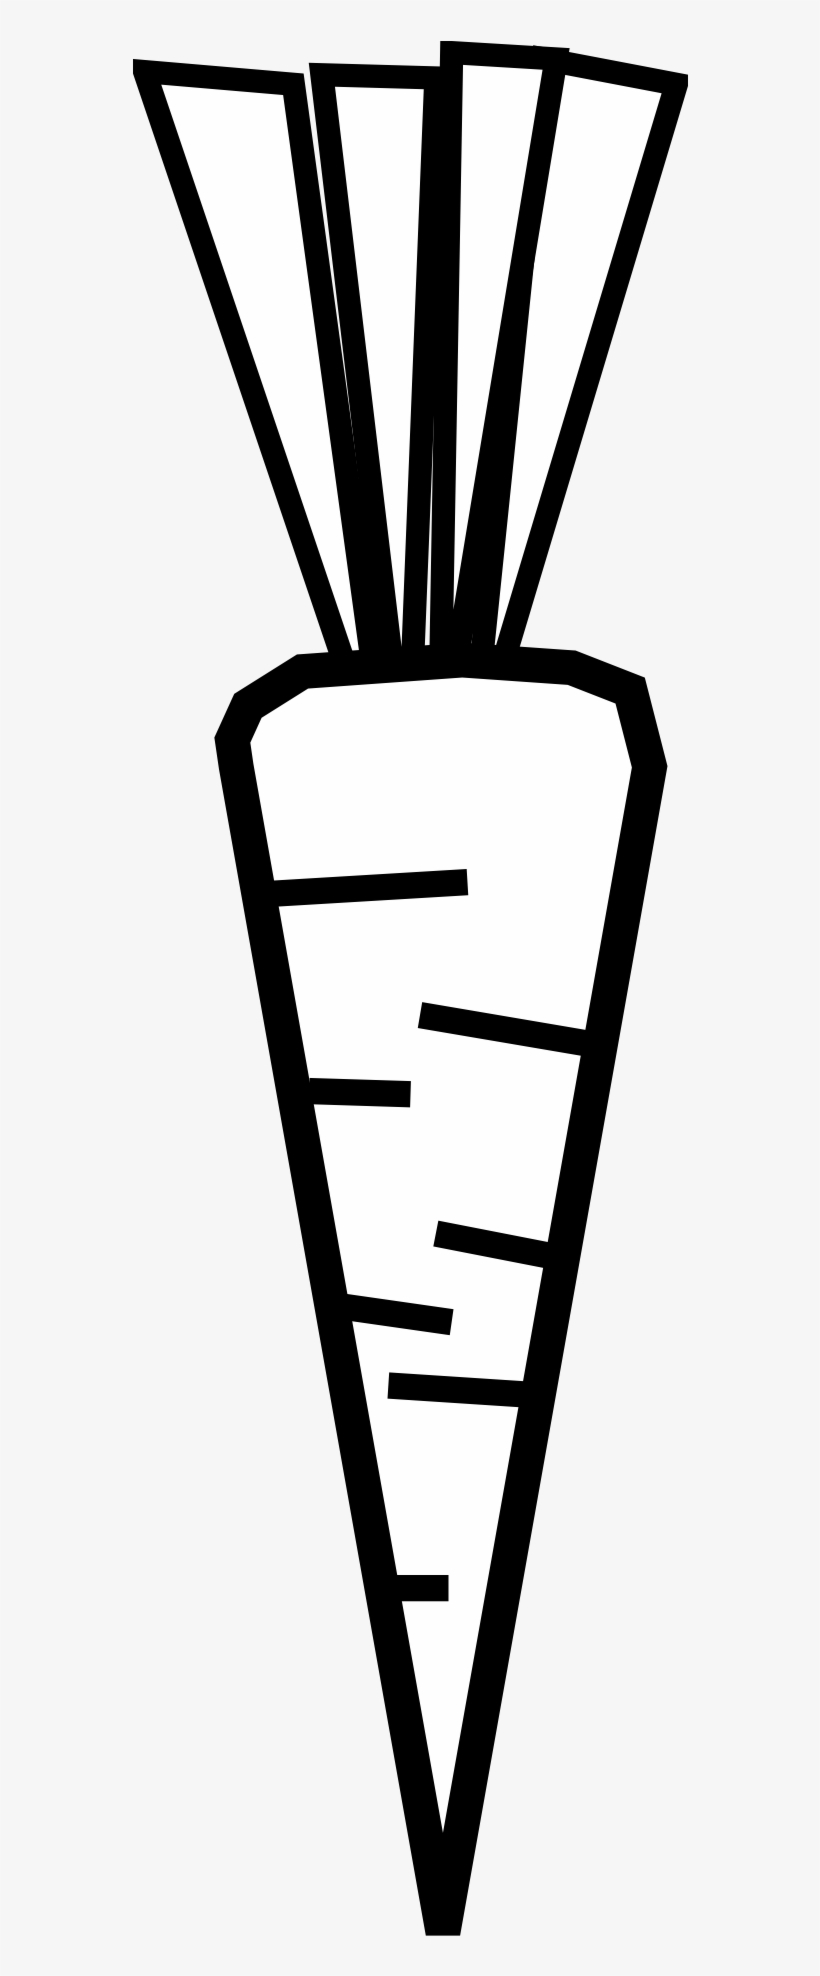 Carrot Clip Art - Carrot Clipart Black And White, transparent png #1692799